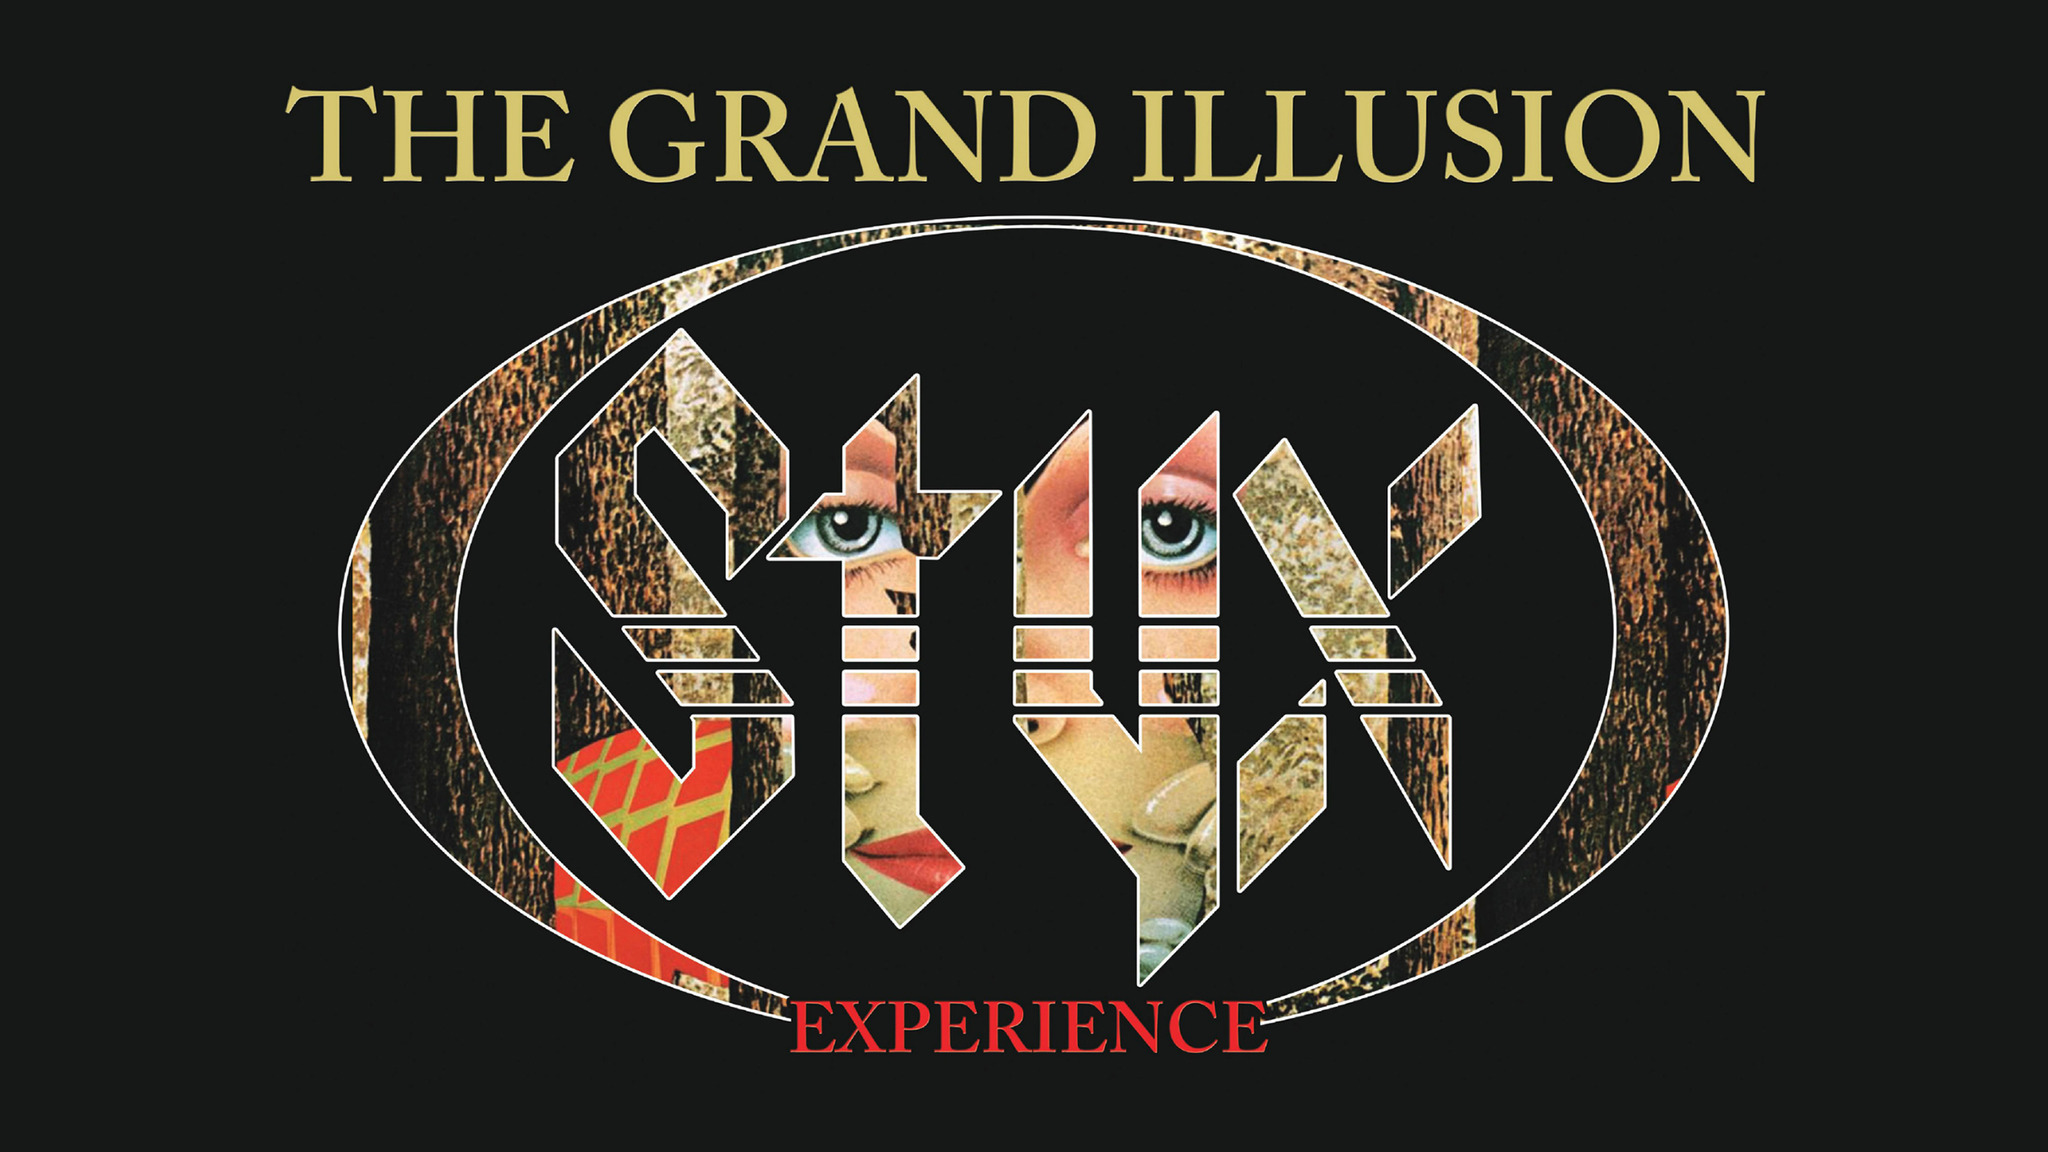 The grand illusion Styx Tickets, 20222023 Concert Tour Dates